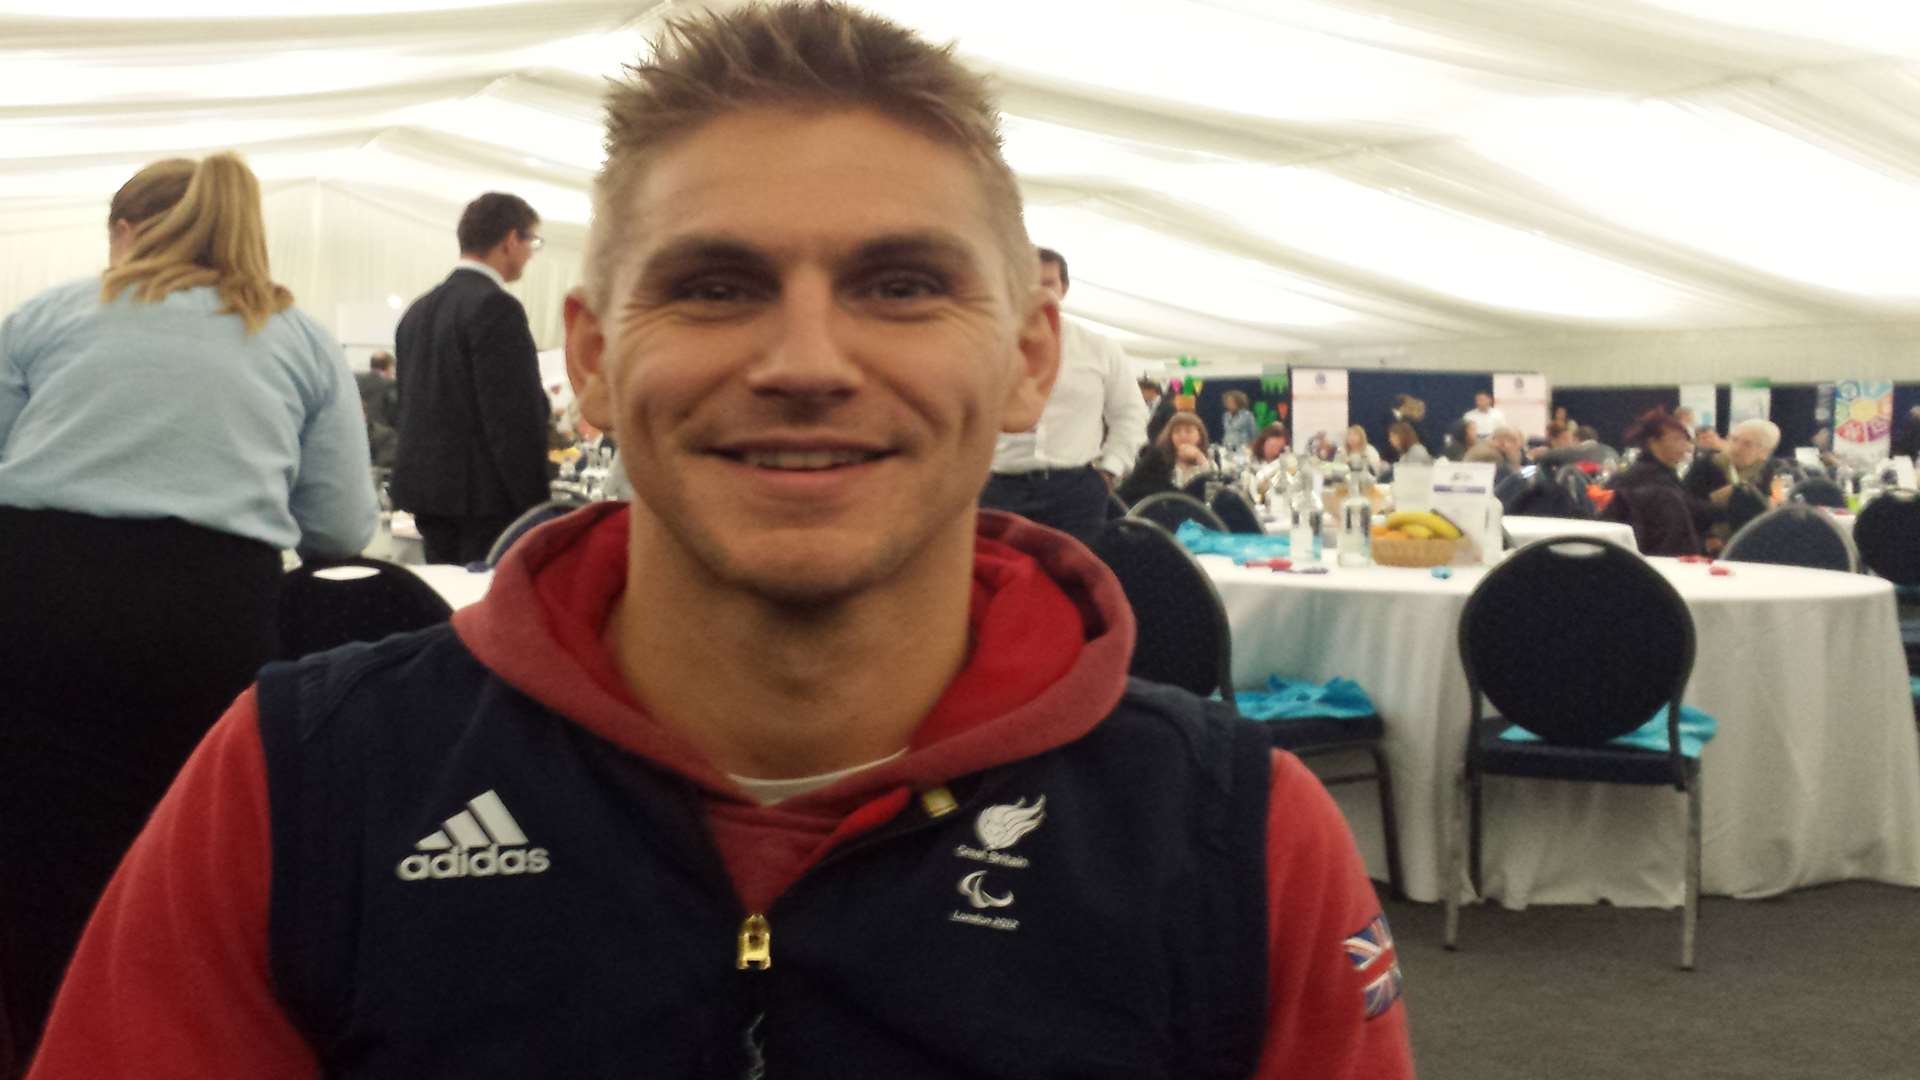 Paralympian Steve Brown from Sheppey gave a motivational speech at the Wellbeing Symposium